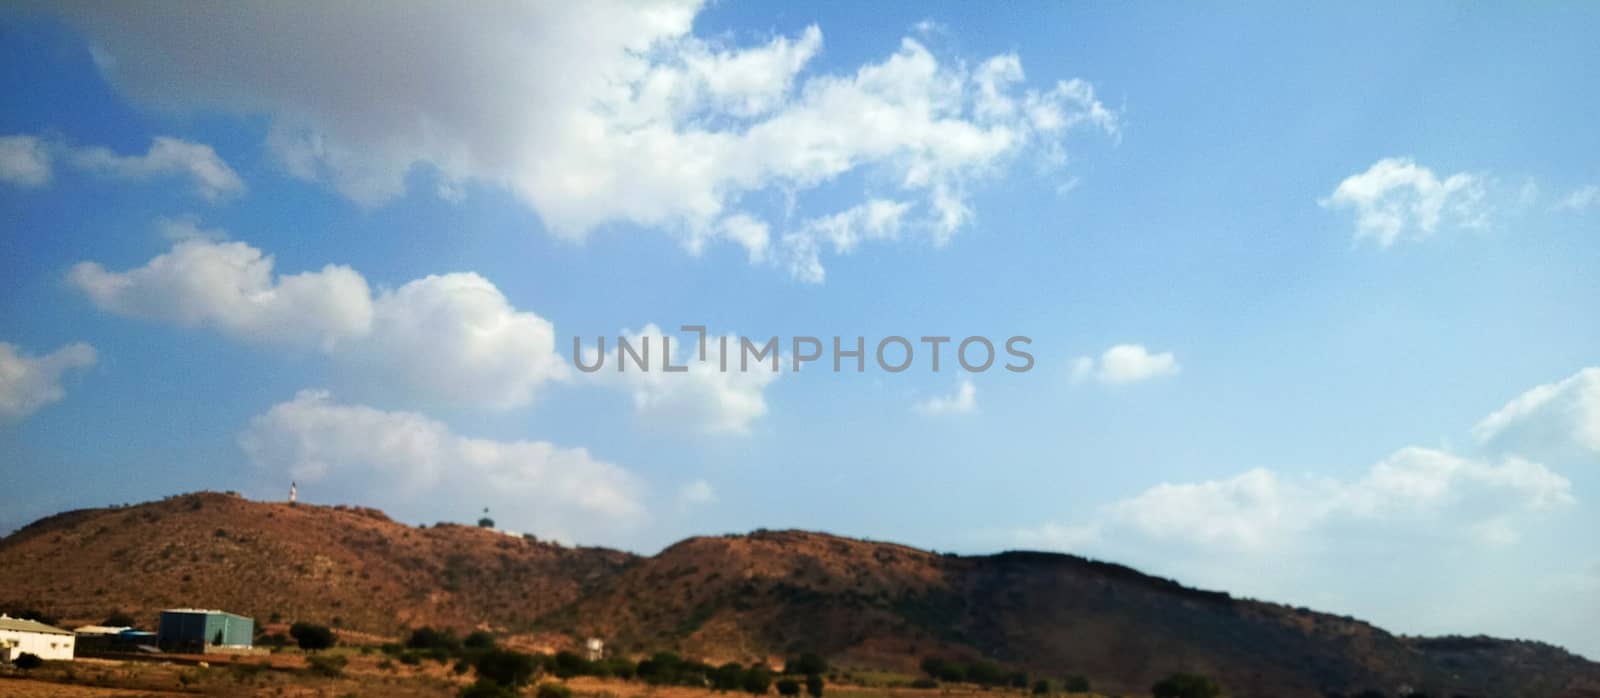 Landscape with Mountain, clouds and trees clicked by ravindrabhu165165@gmail.com